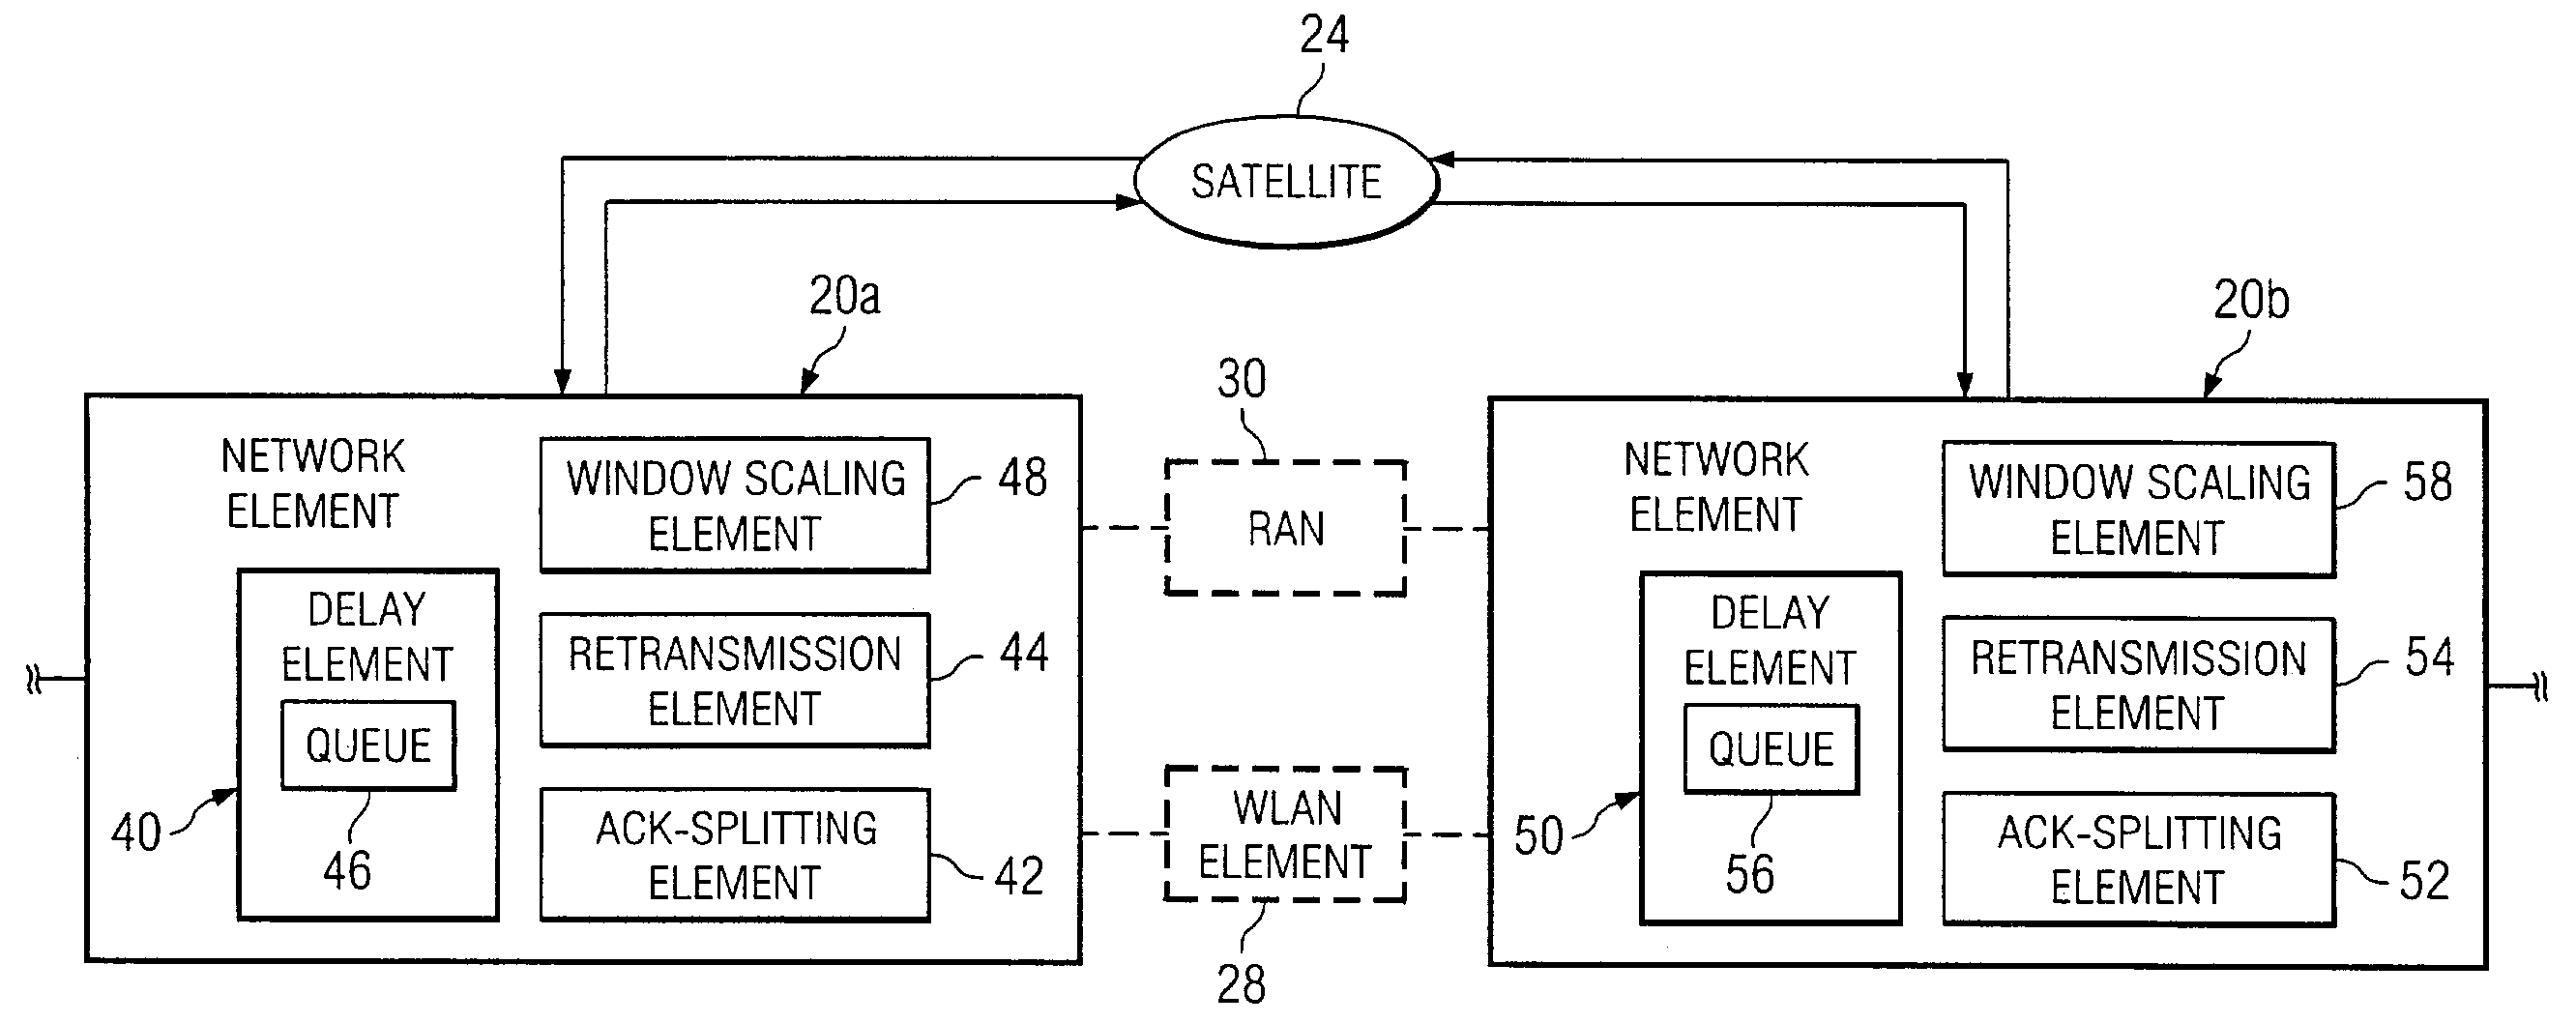 System and method for communicating data in a network environment